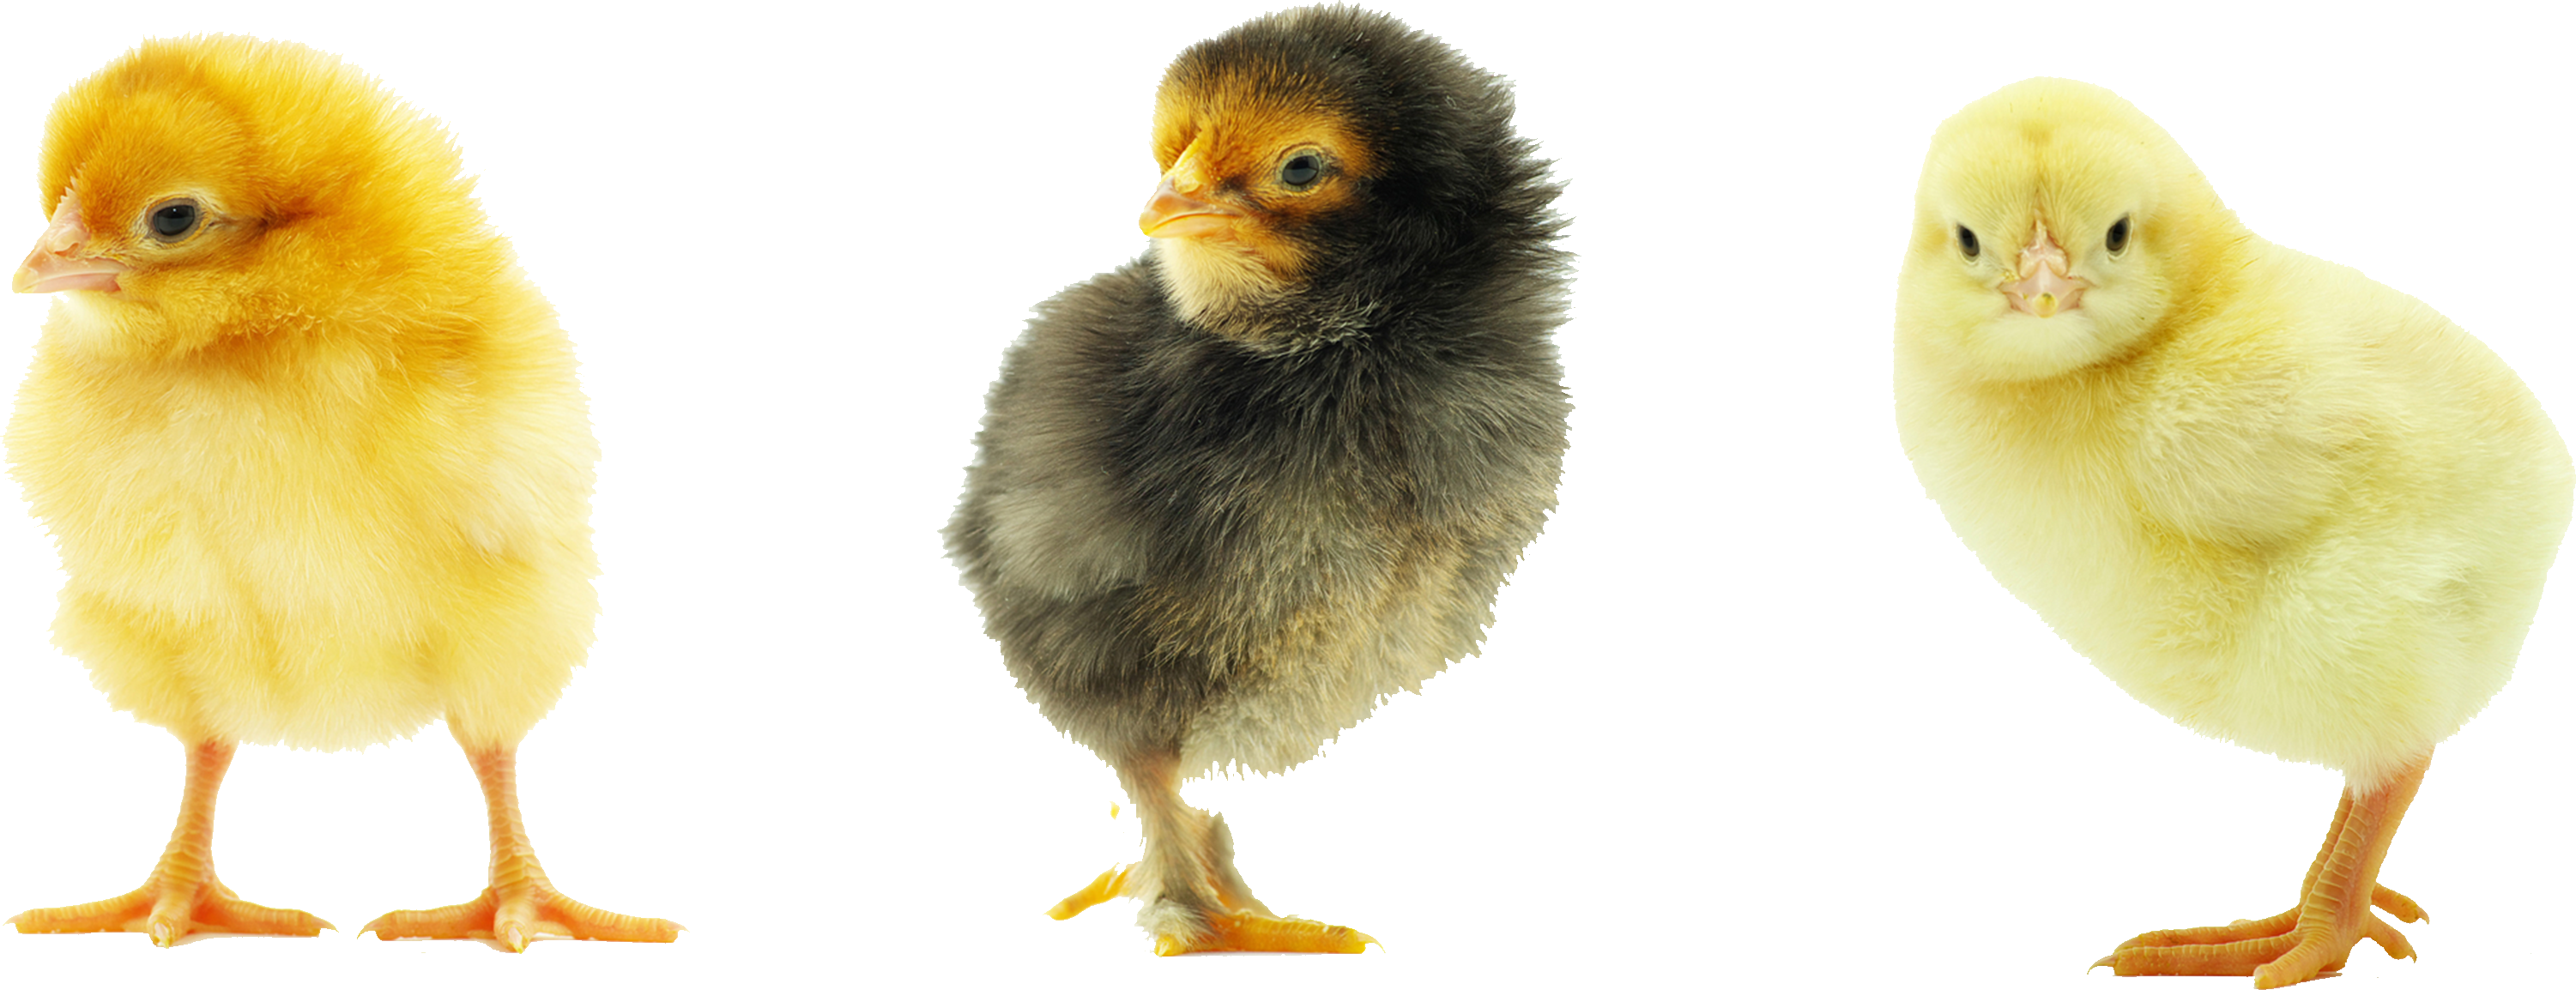 Baby Chicken Transparent Background - Chicken, Transparent background PNG HD thumbnail